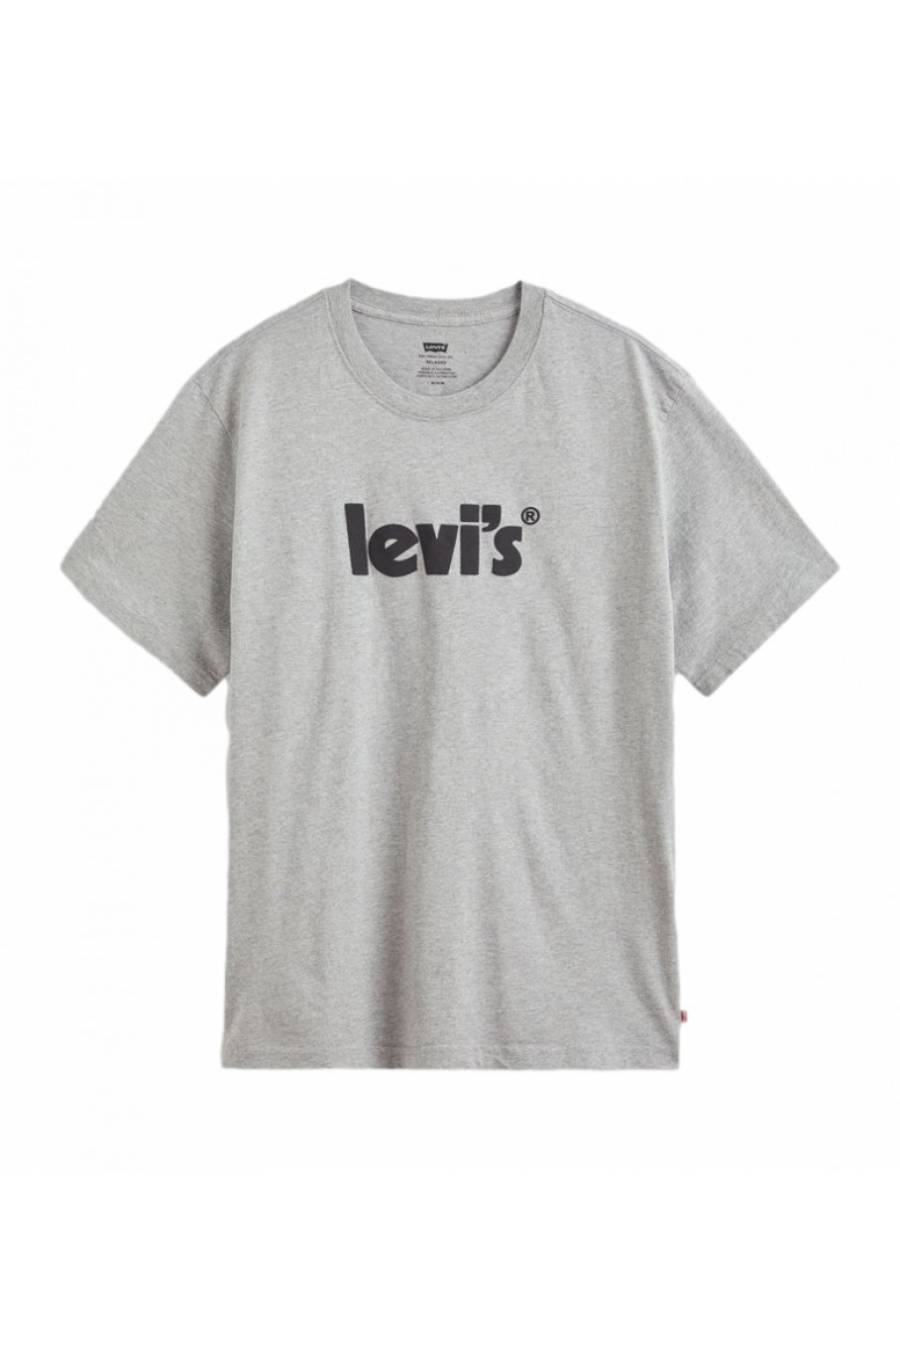 Camiseta Levi's Relaxed Fit 16143-0392